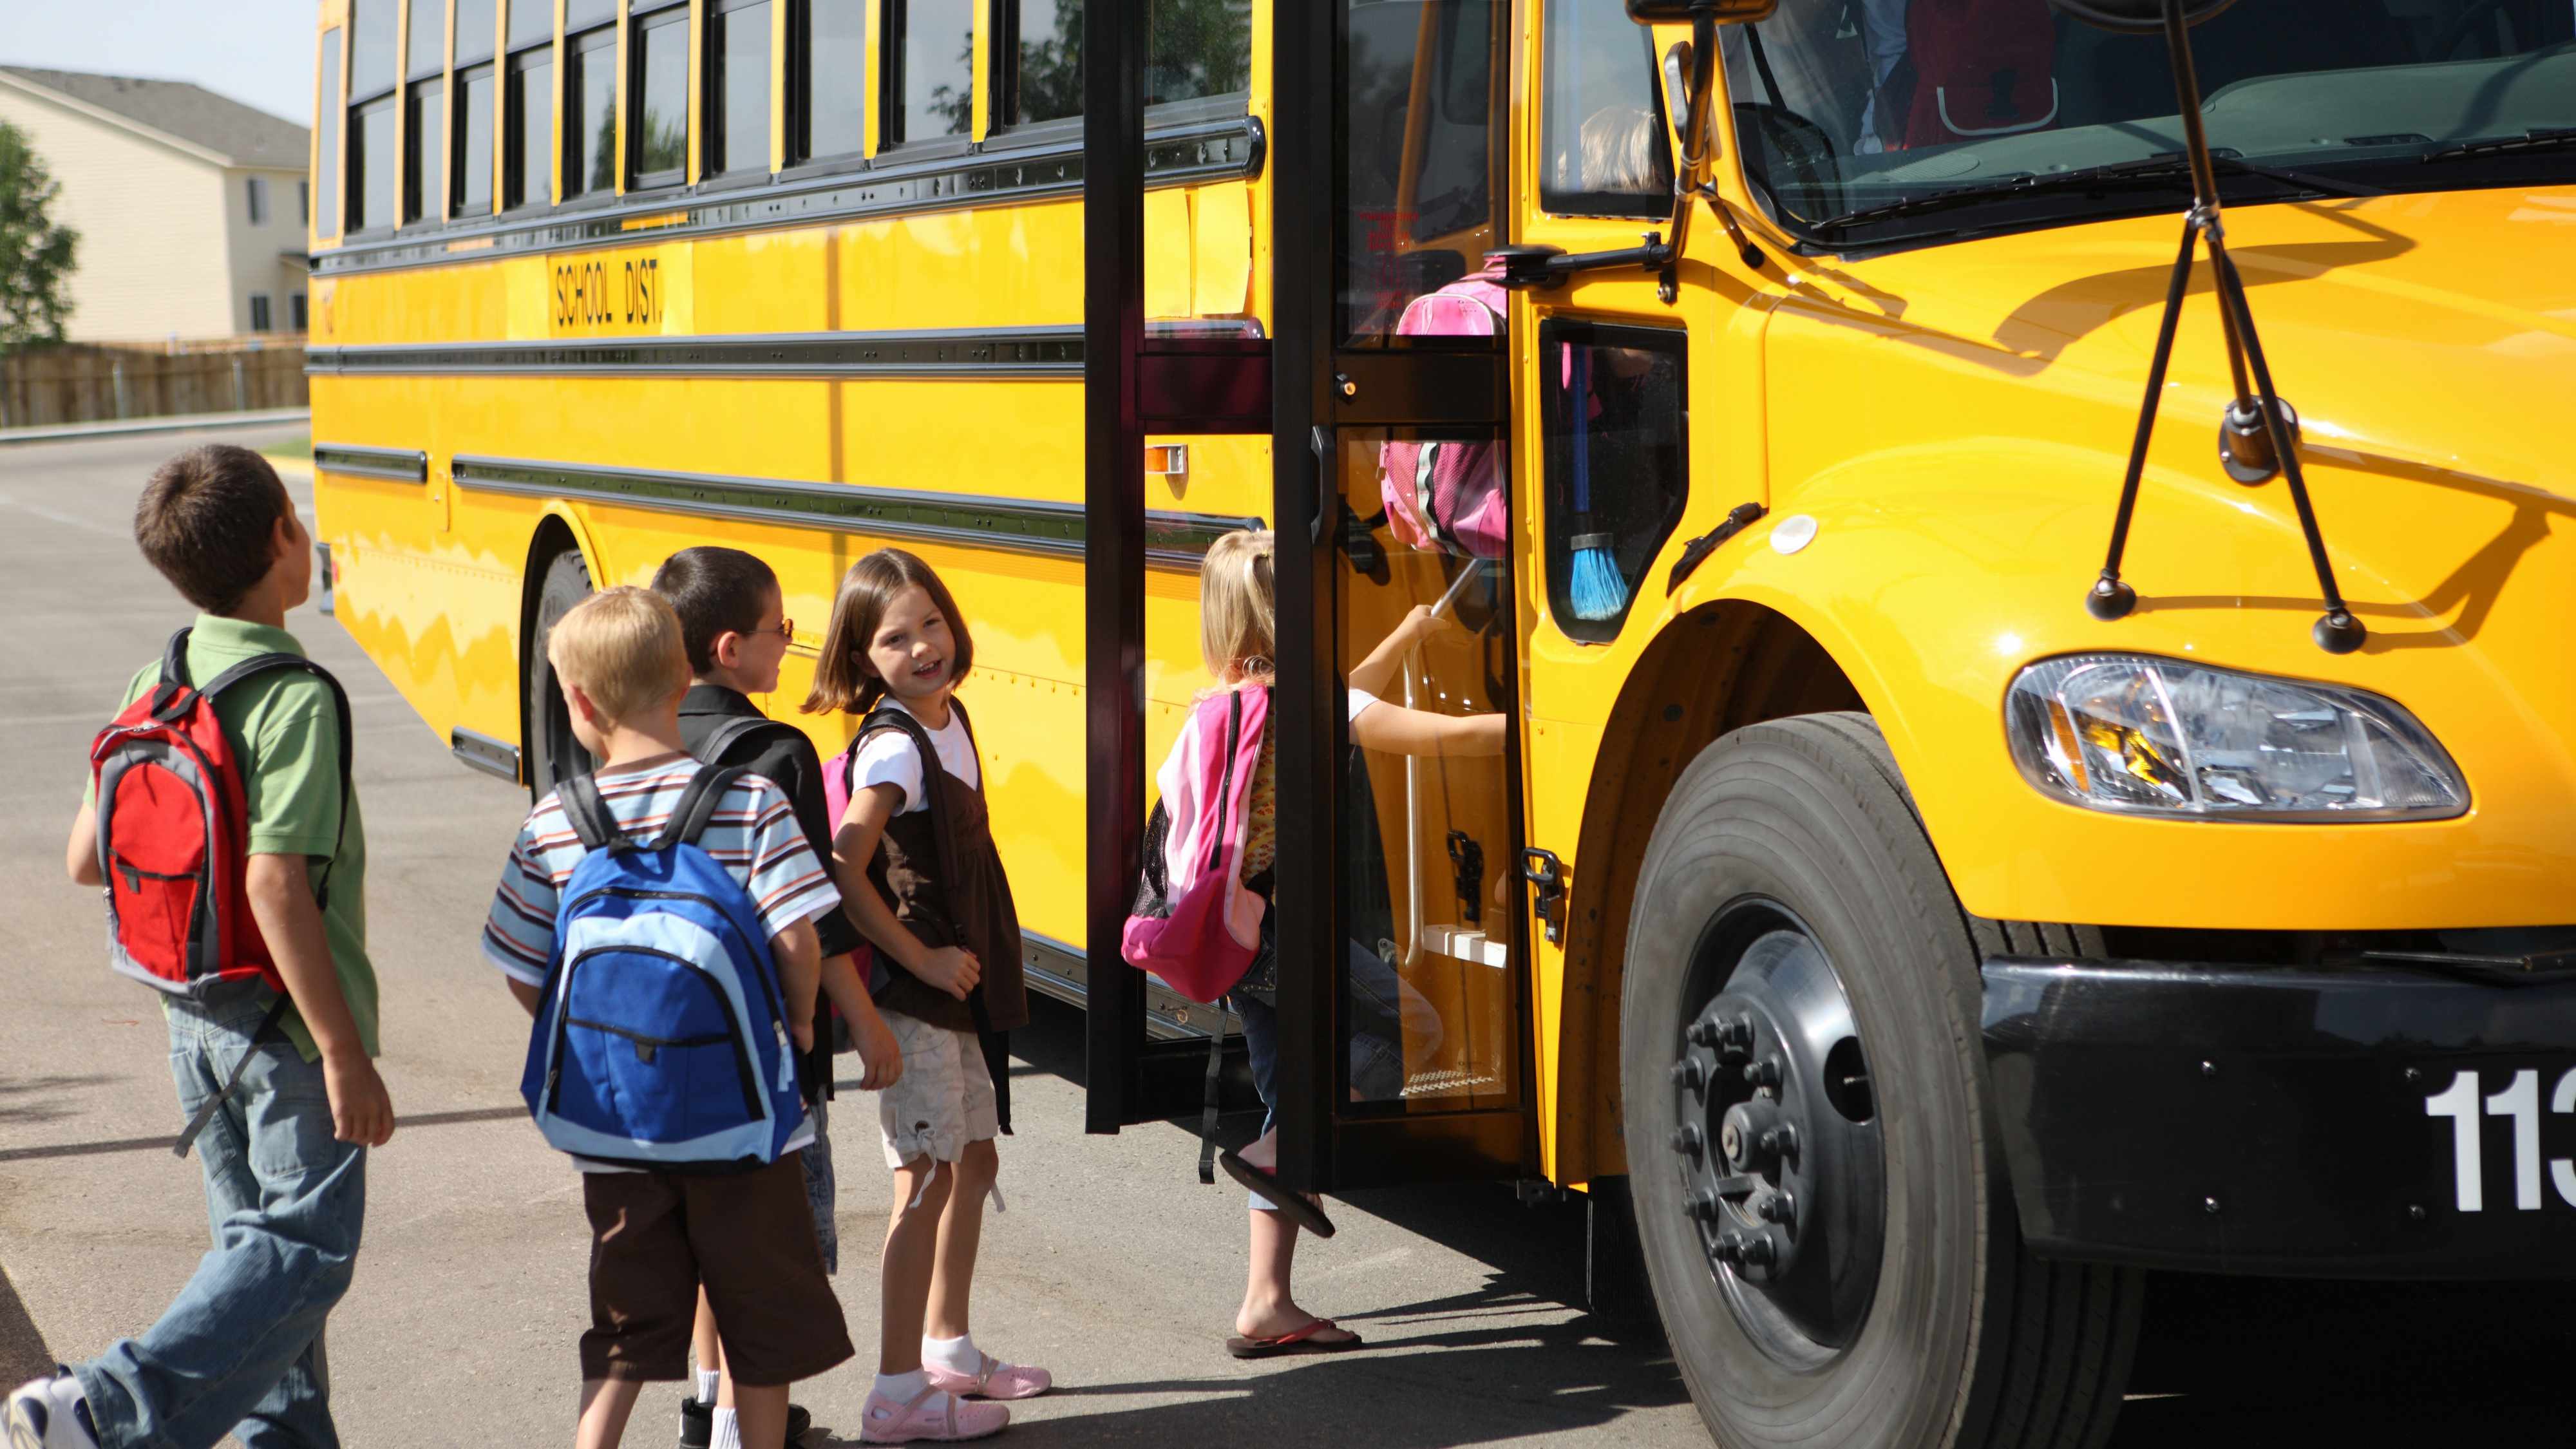 a group of young elementary school children with backpacks, getting on a school bus